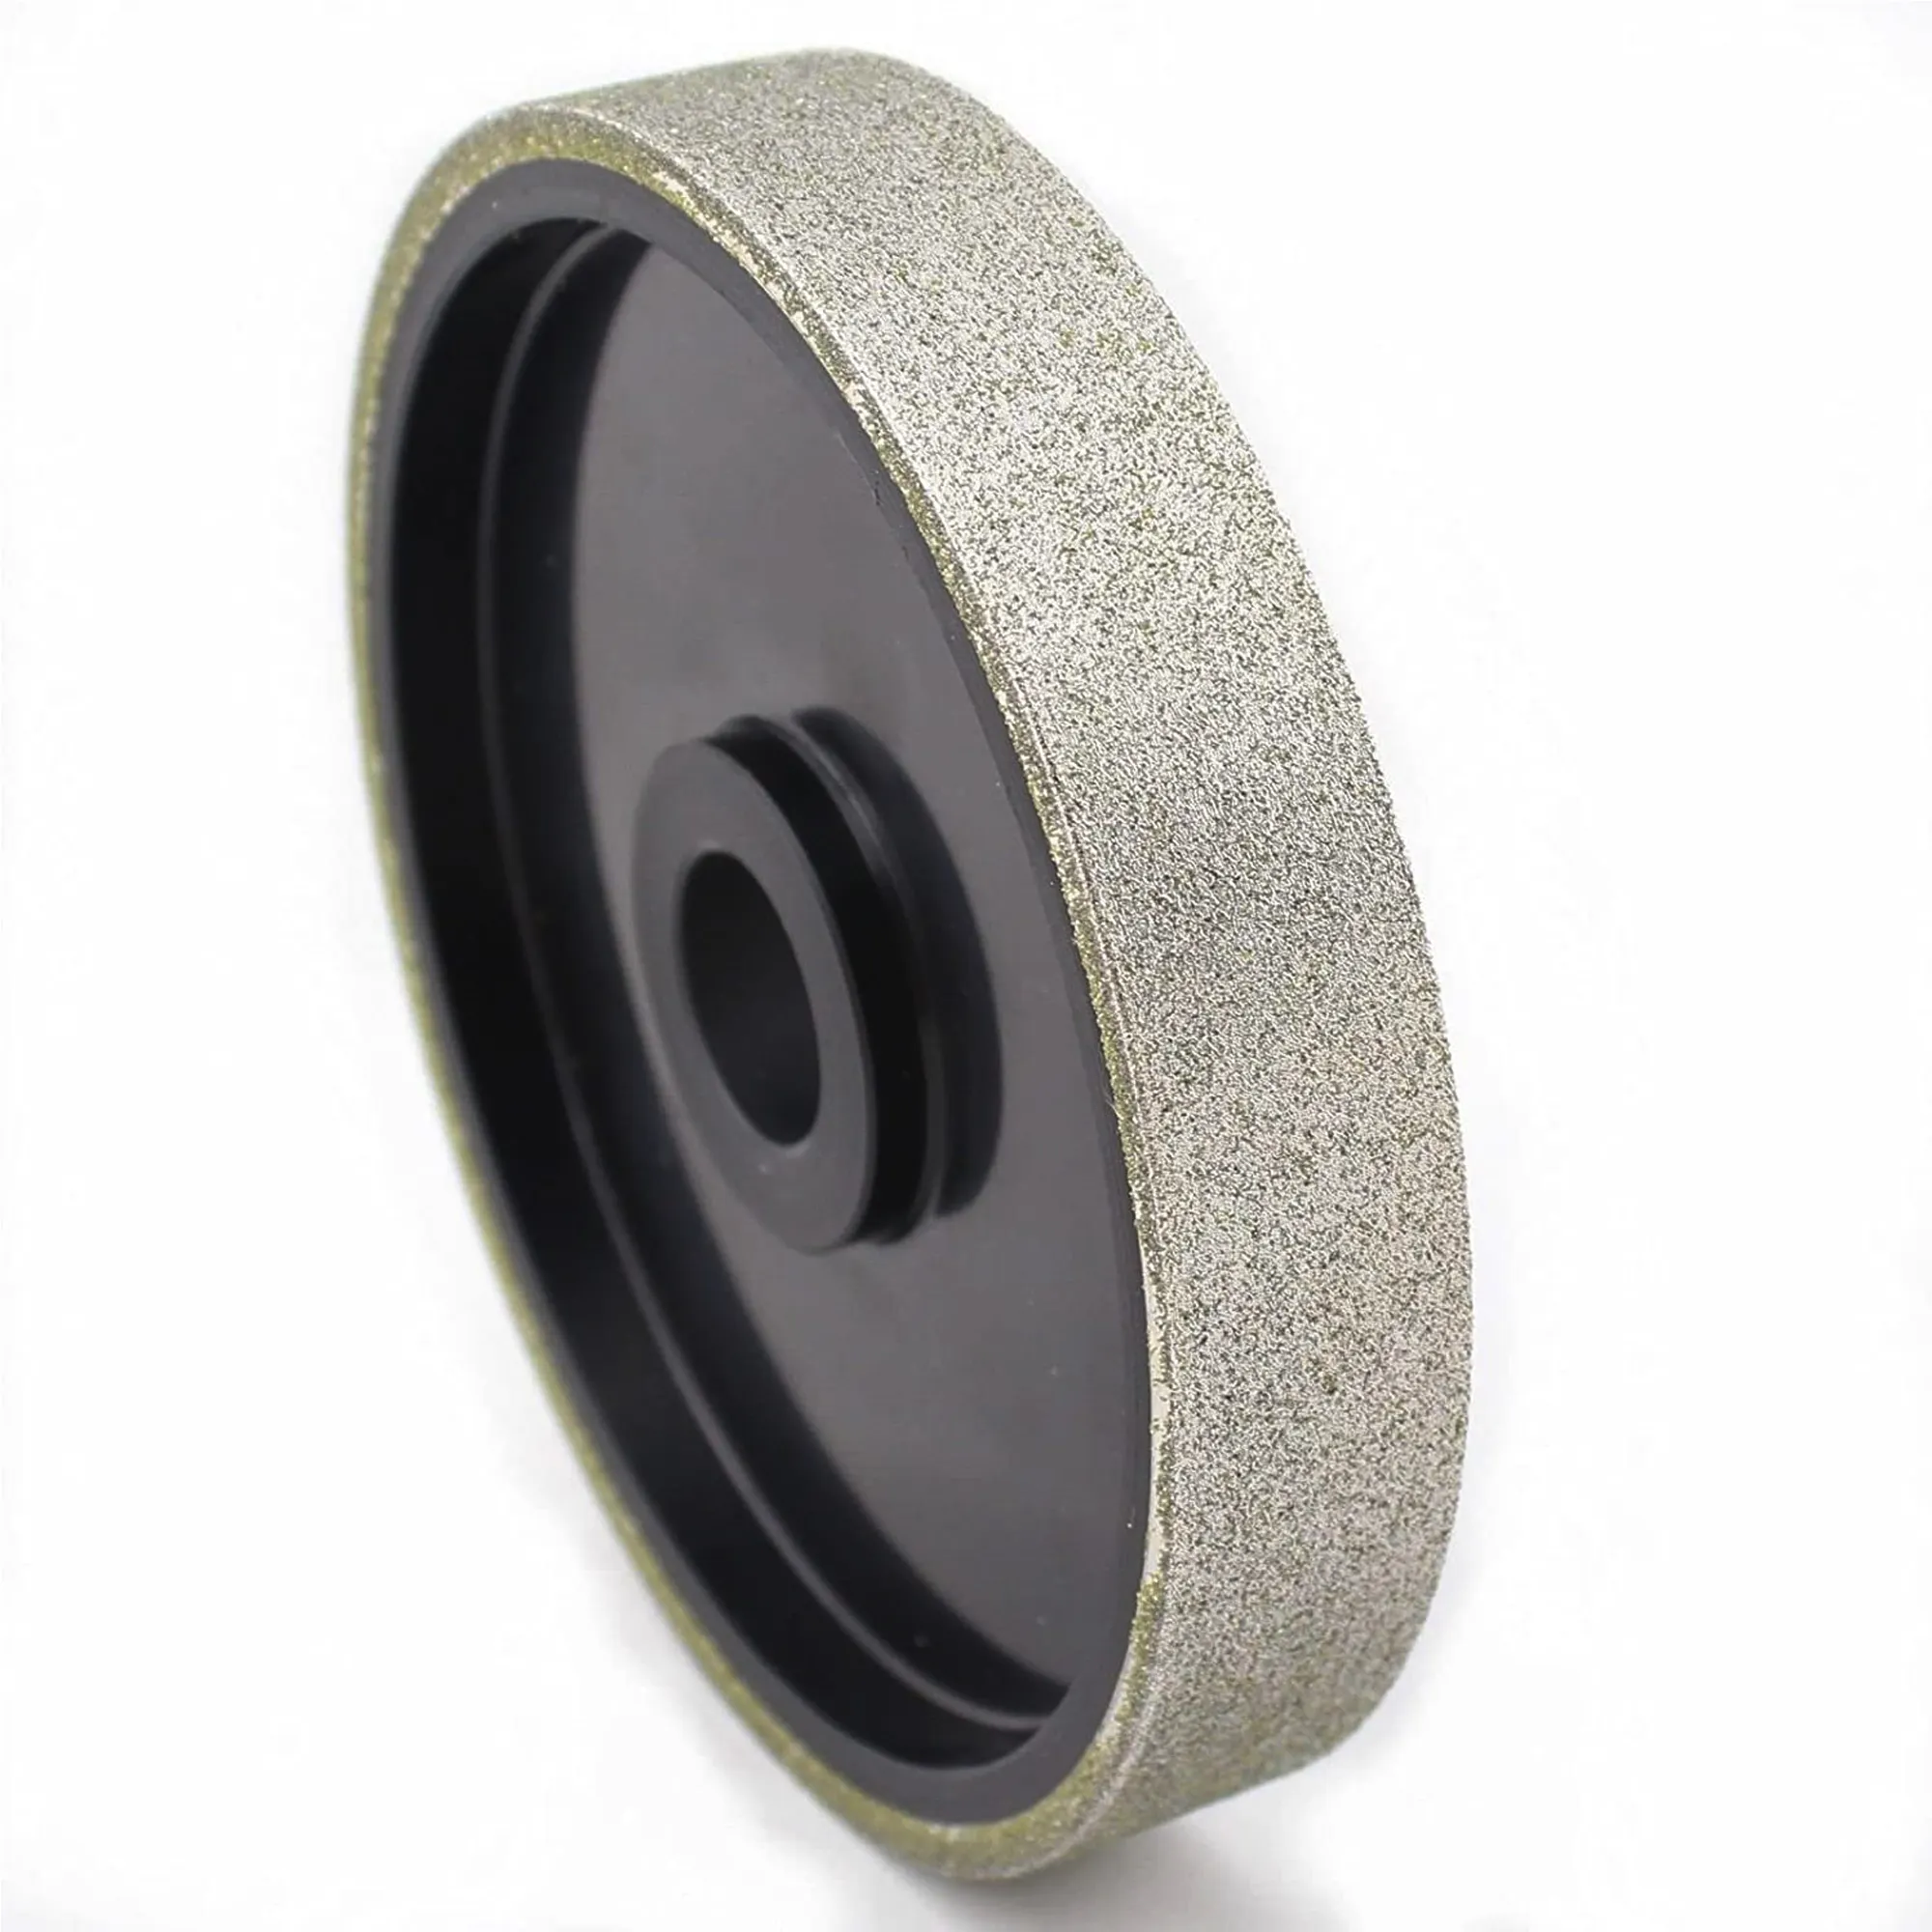 Lapidary gem Jewelry Grinding Wheel 150mm With 25.4mmArbor Hole for Gem Granite Glass Stone Marble Grinding and polishing